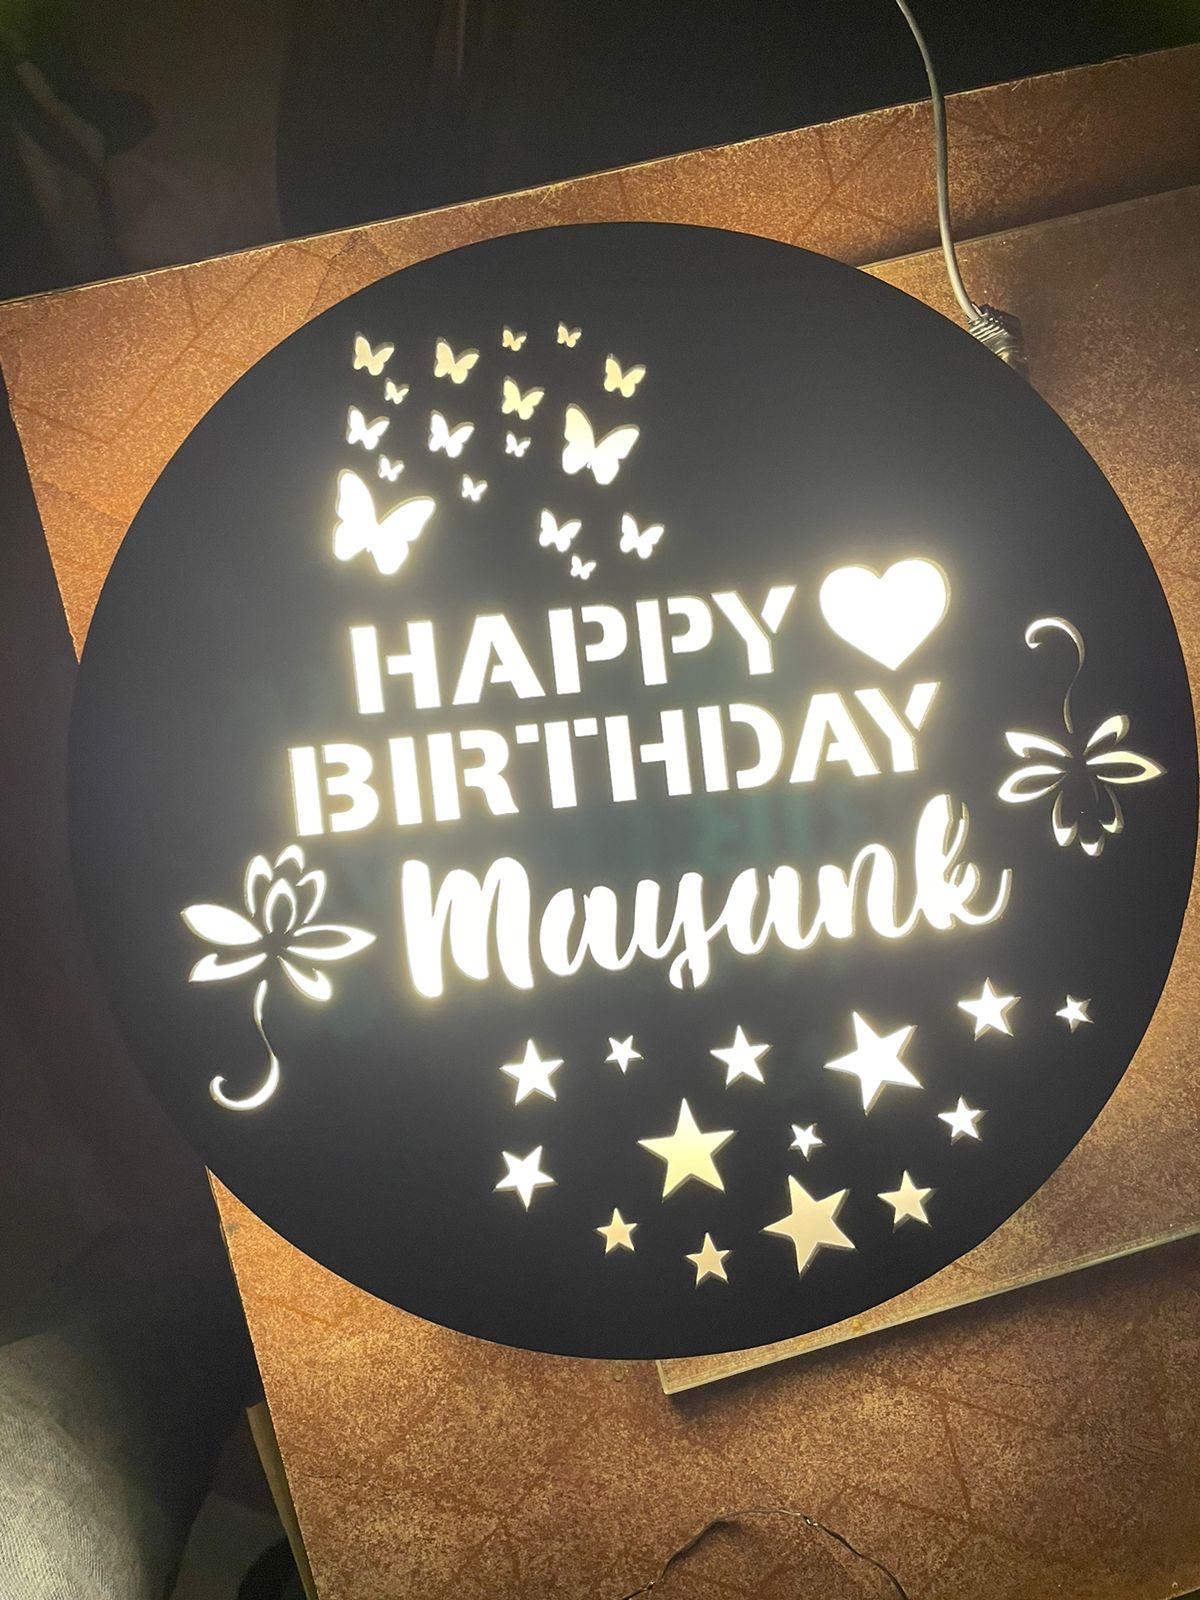 Shopinsta® Customised Round Shaped Lamp Birthday Wooden Name LED Lamp Customize & Personalize with Any Name- birthday Husband Wife Boyfriend Girlfriend (Wooden, 12X12 inches)